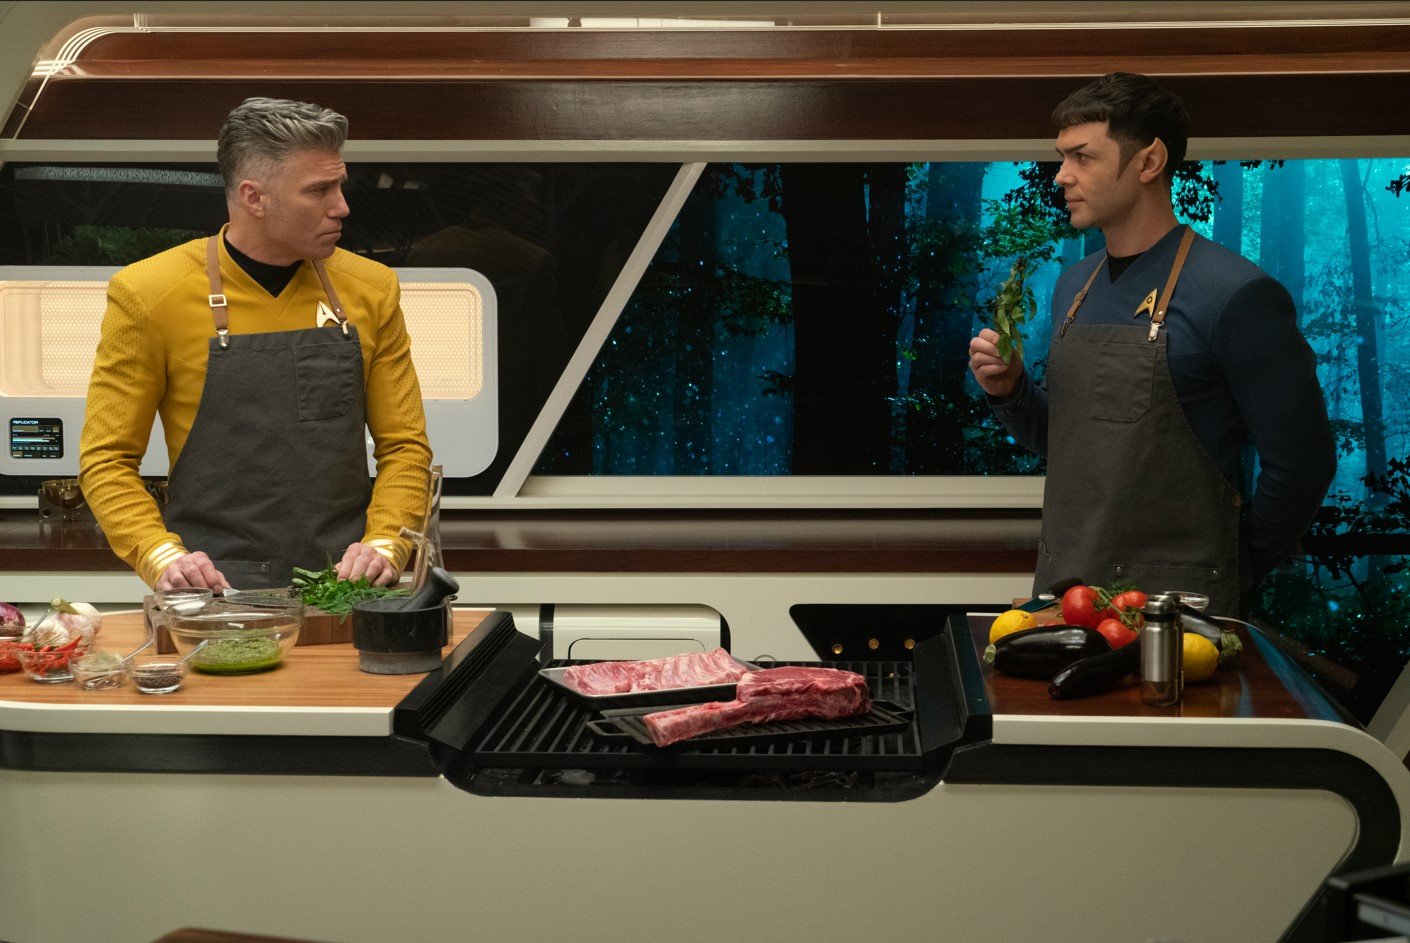   Anson Mount  as Capt. Pike and  Ethan Peck  as Spock. Photo Credit: Michael Gibson/Paramount+ 